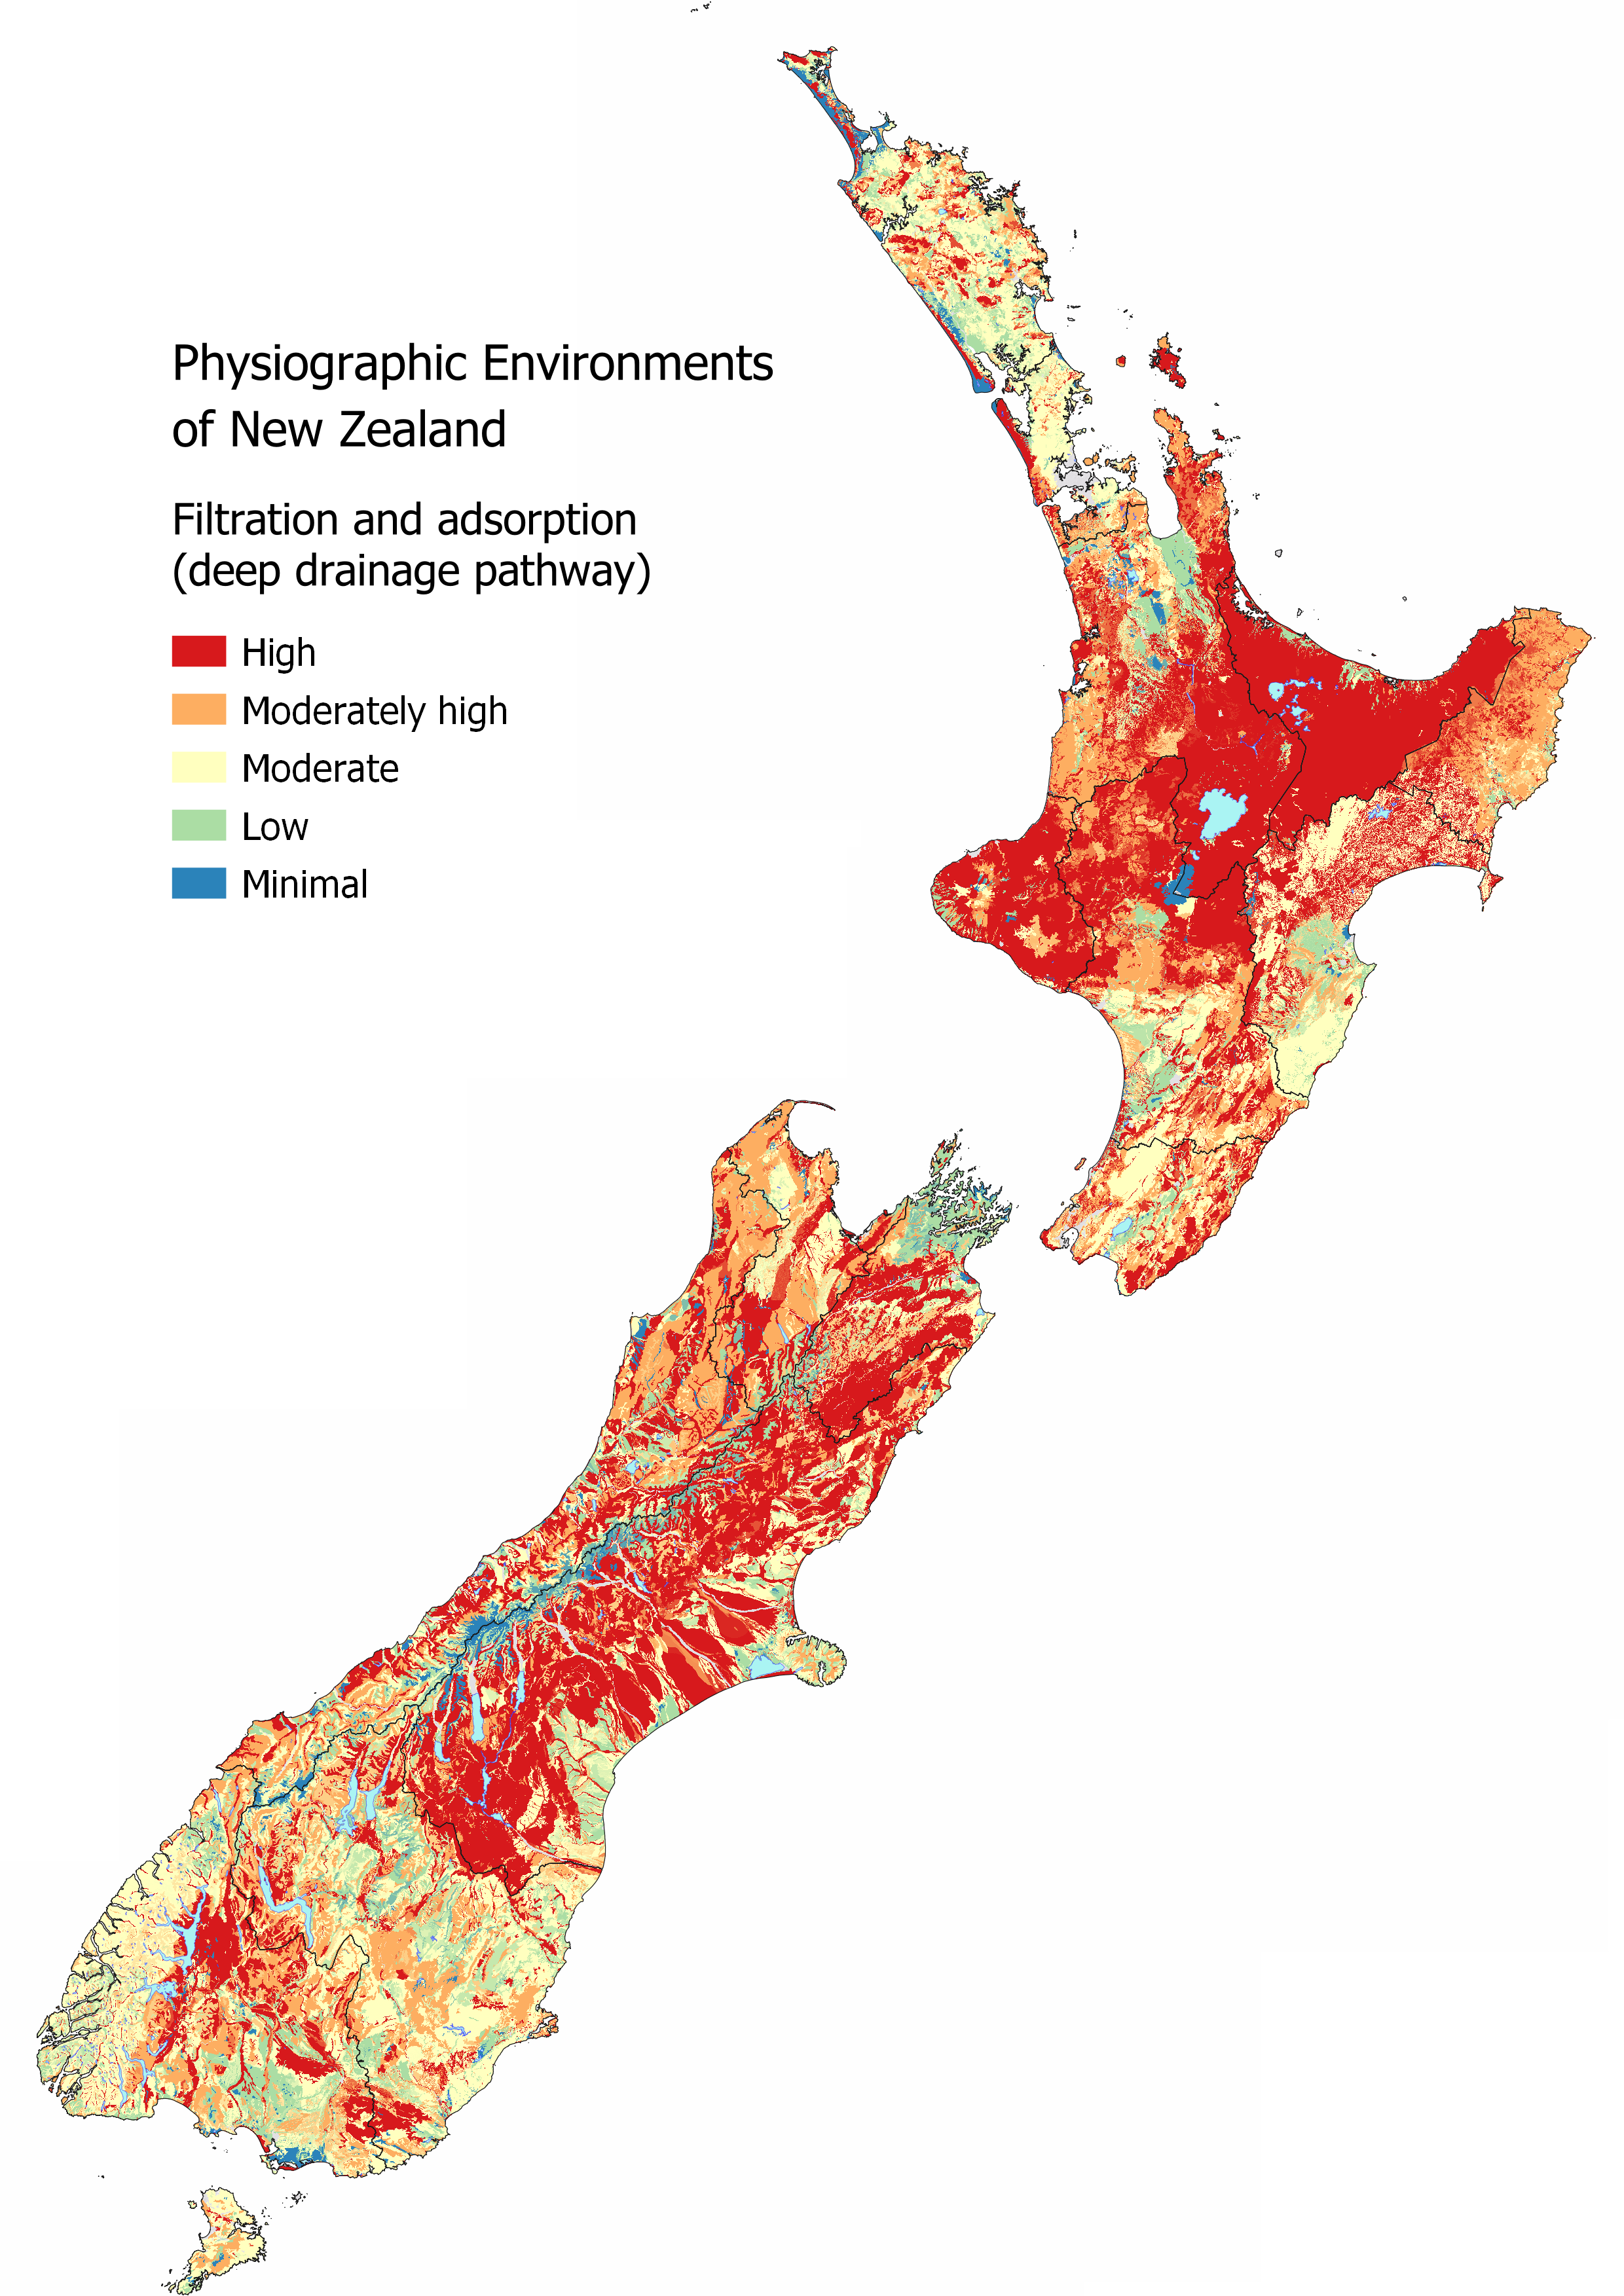 Colour-coded map of New Zealand showing Filtration and Absorbtion from Minimal to High.